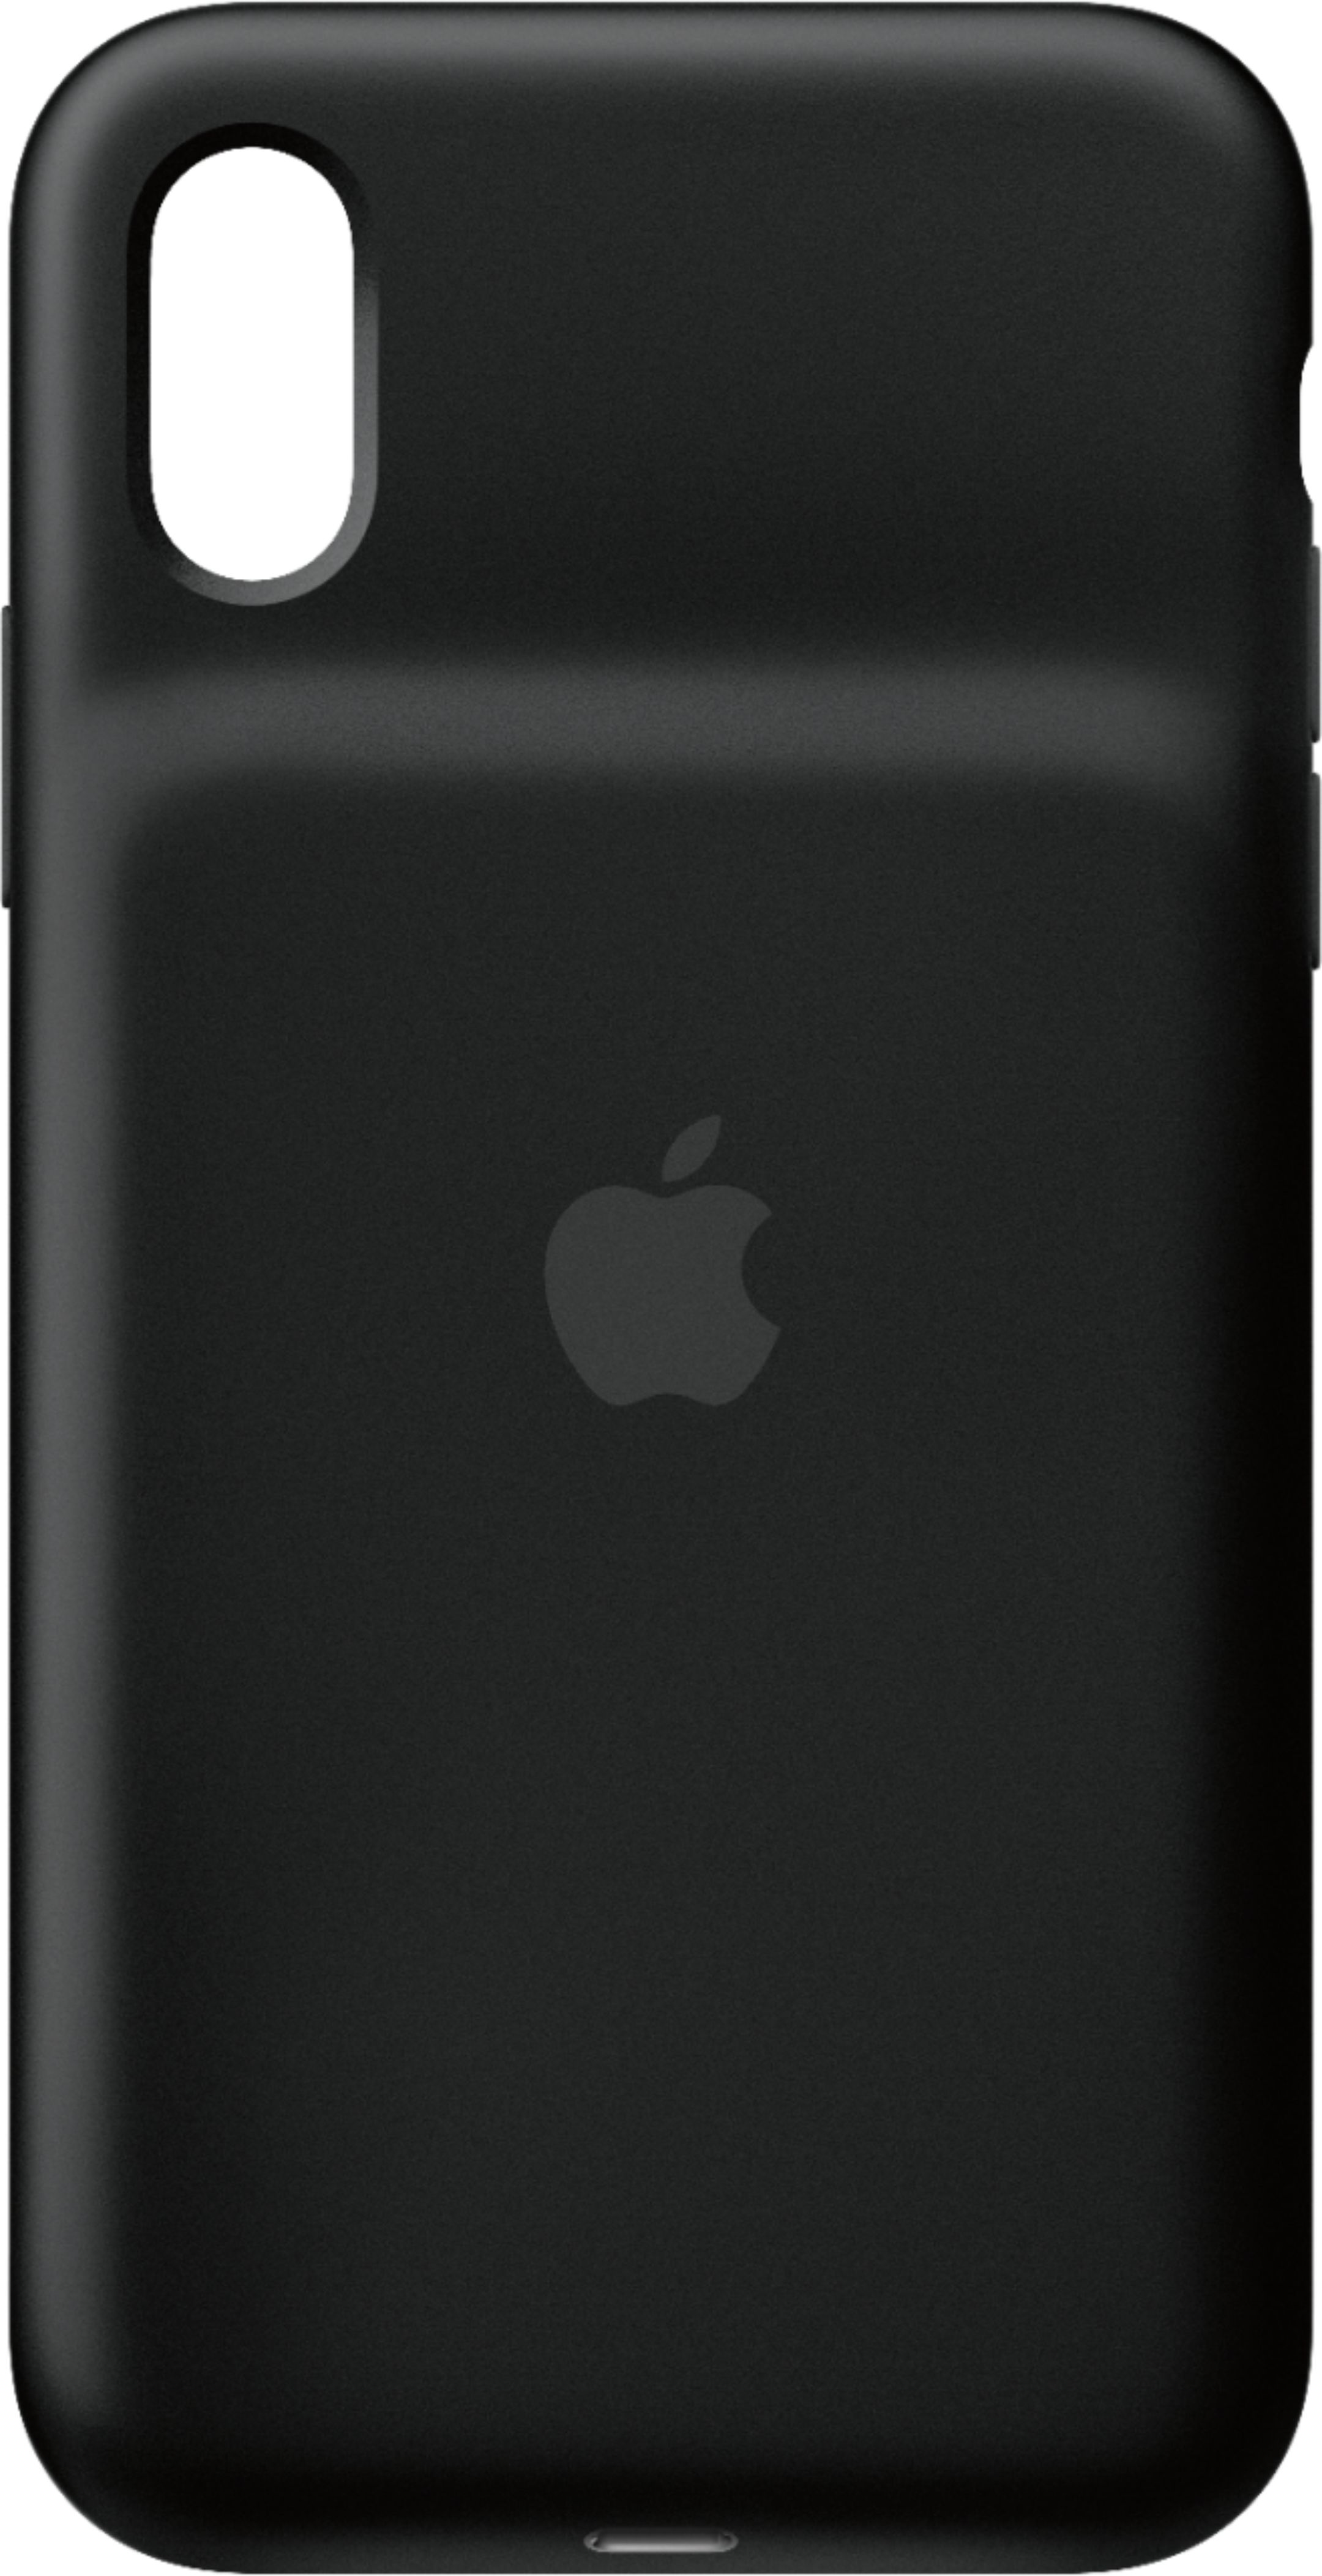 Press Play Ppixbcn-blk Nero7 Battery Case For Iphone Xs/x